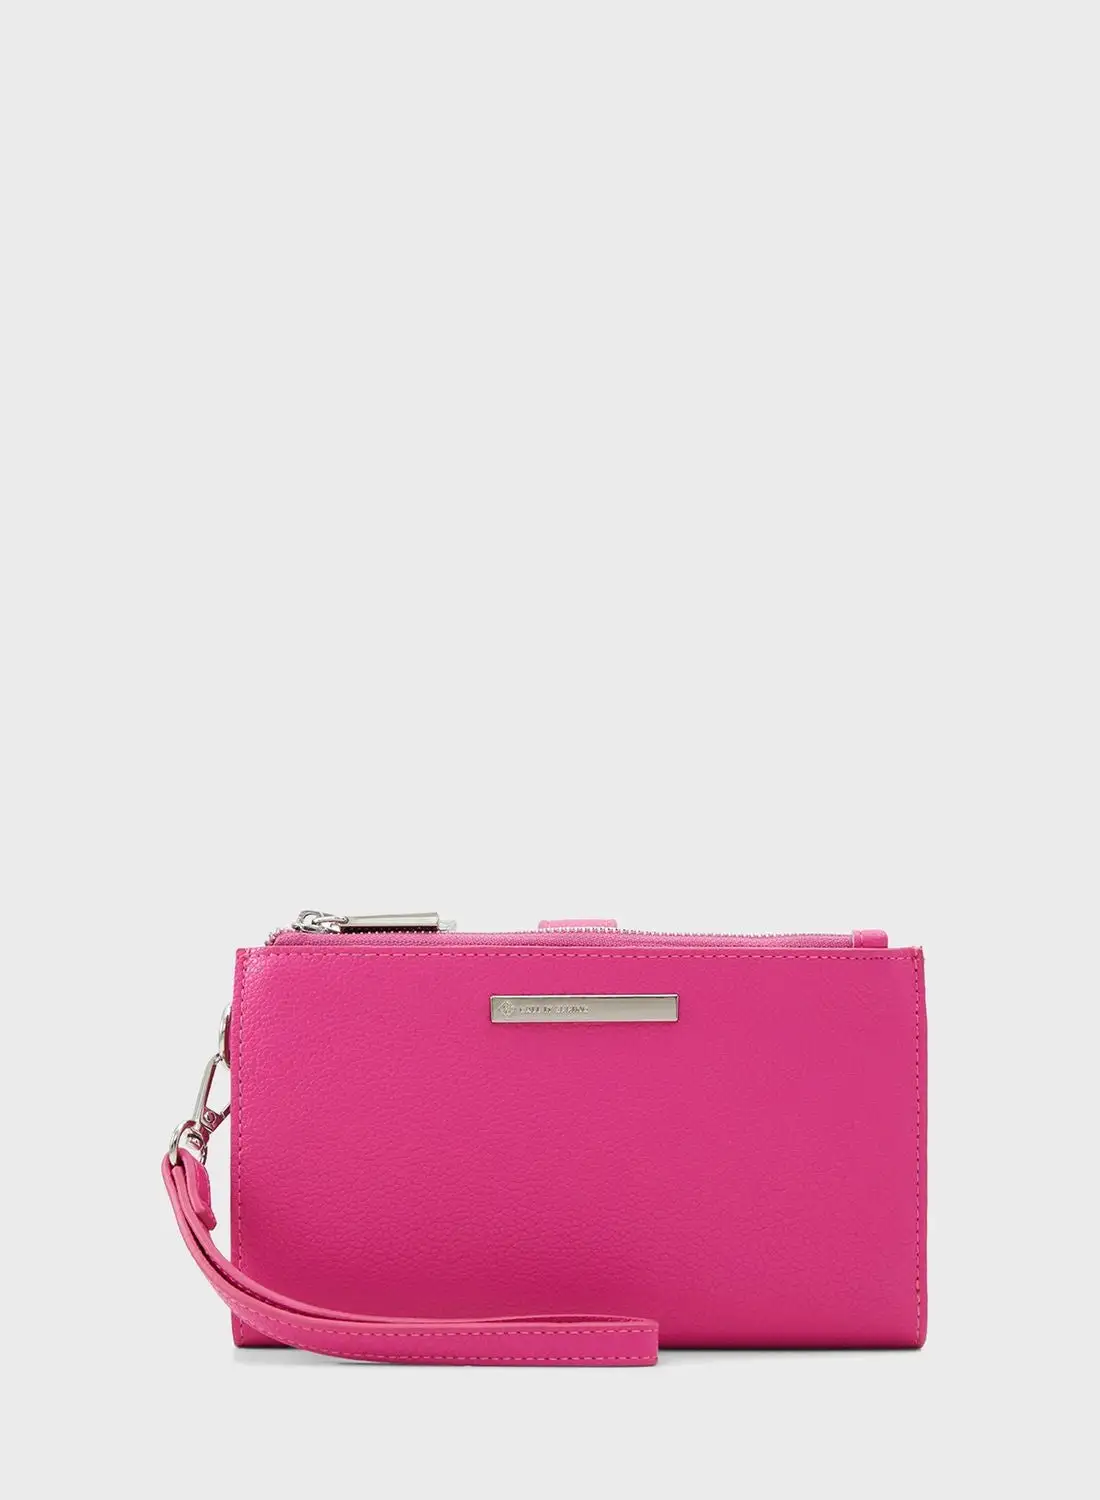 CALL IT SPRING Gianinna Wallet